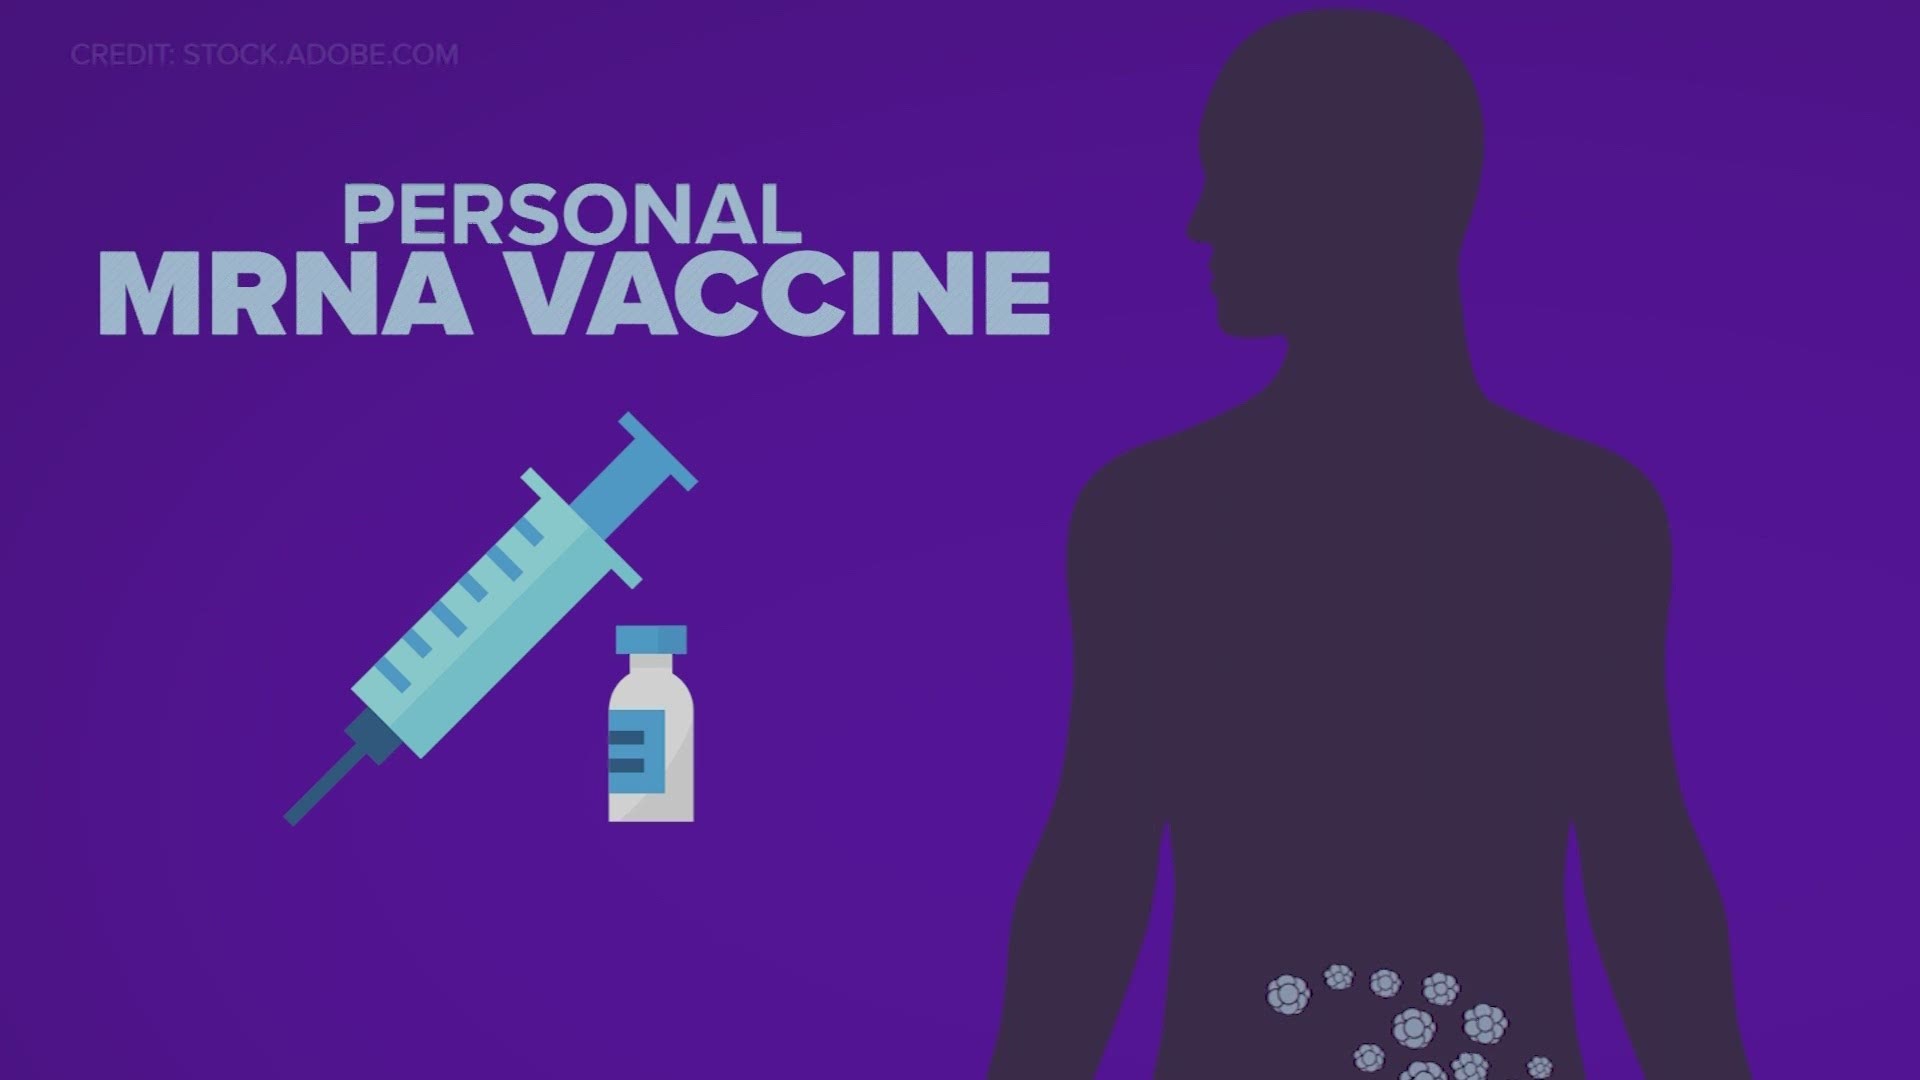 Brendan Mincheff explains what MRNA means and why it's an important component in vaccines.